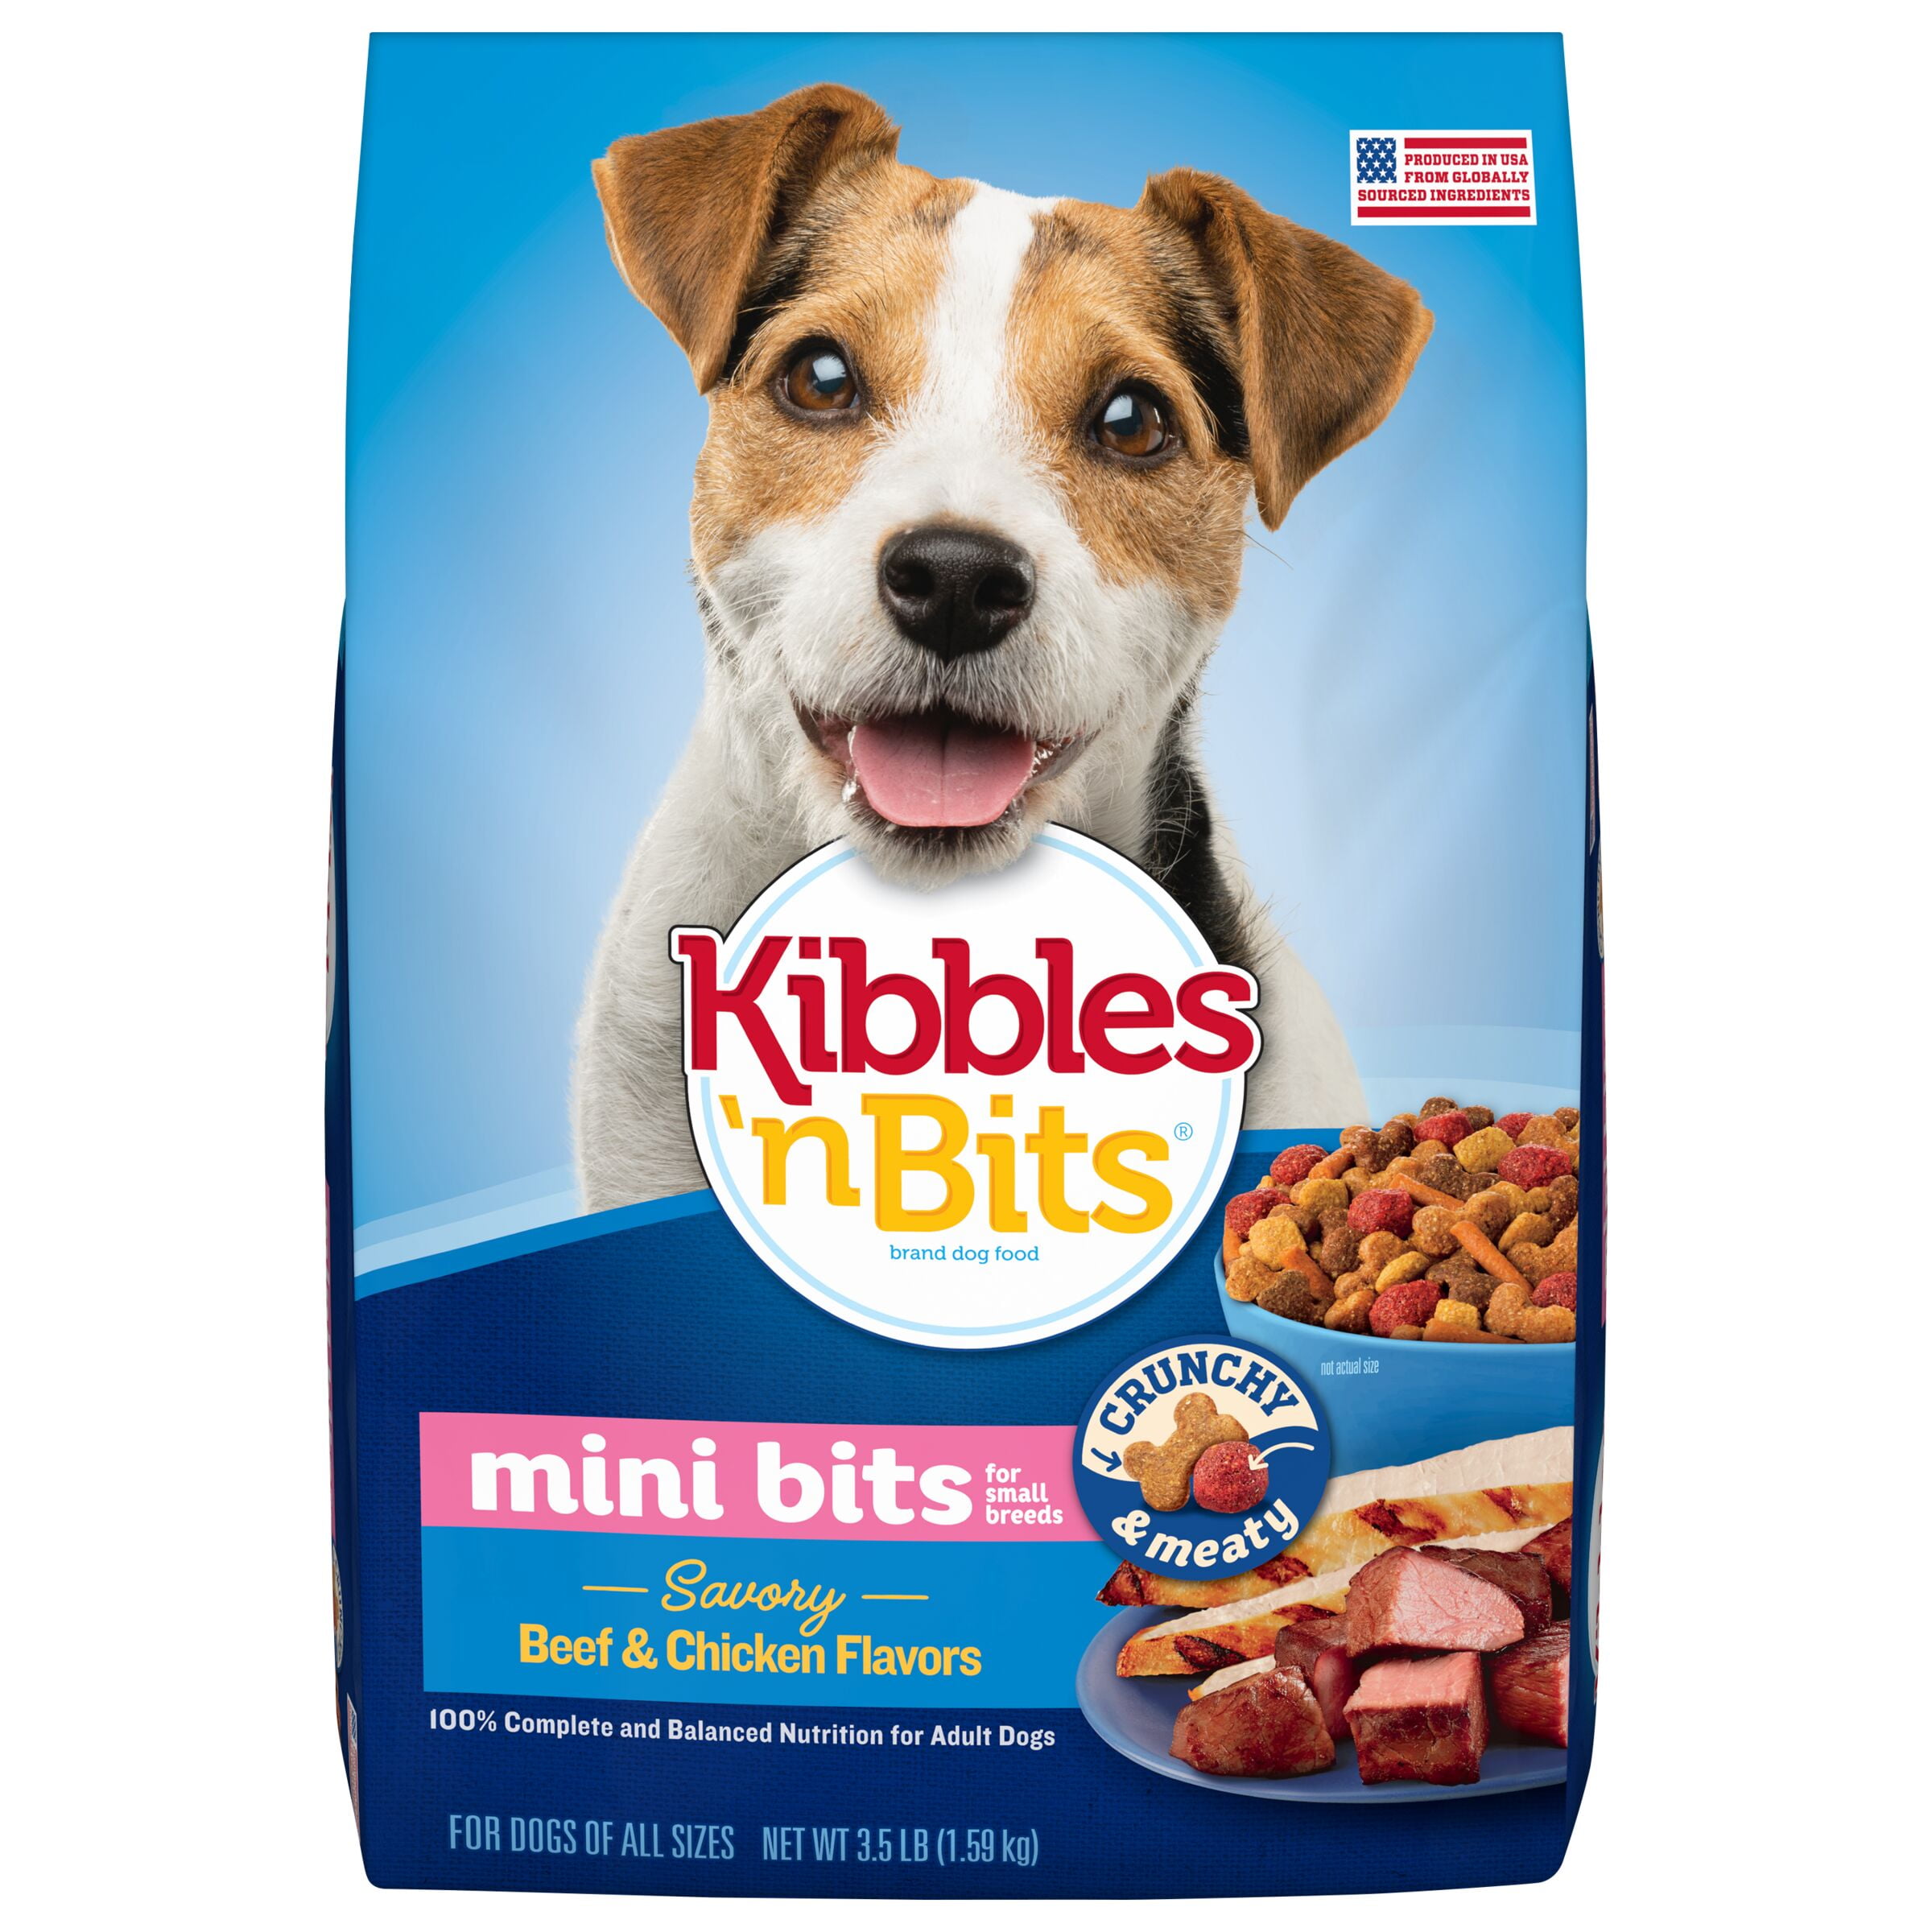 Kibbles 'N Bits Small Breed, Mini Bits, Savory Beef and Chicken Flavor Dog Food, 3.5-Pound